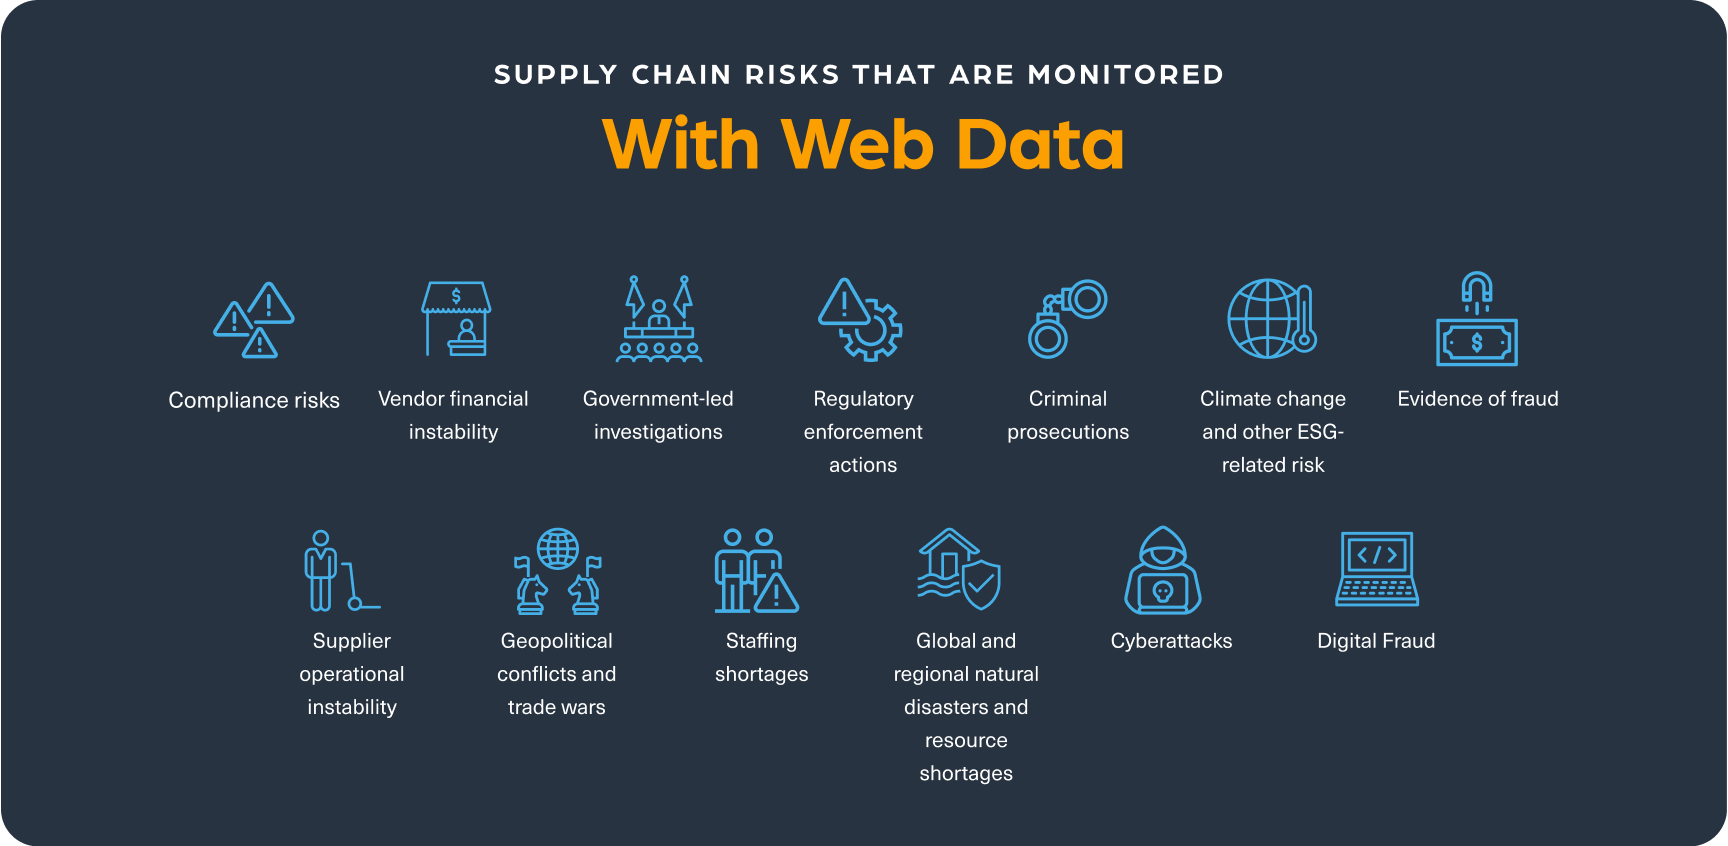 Supply chain risks that can be monitored with web data